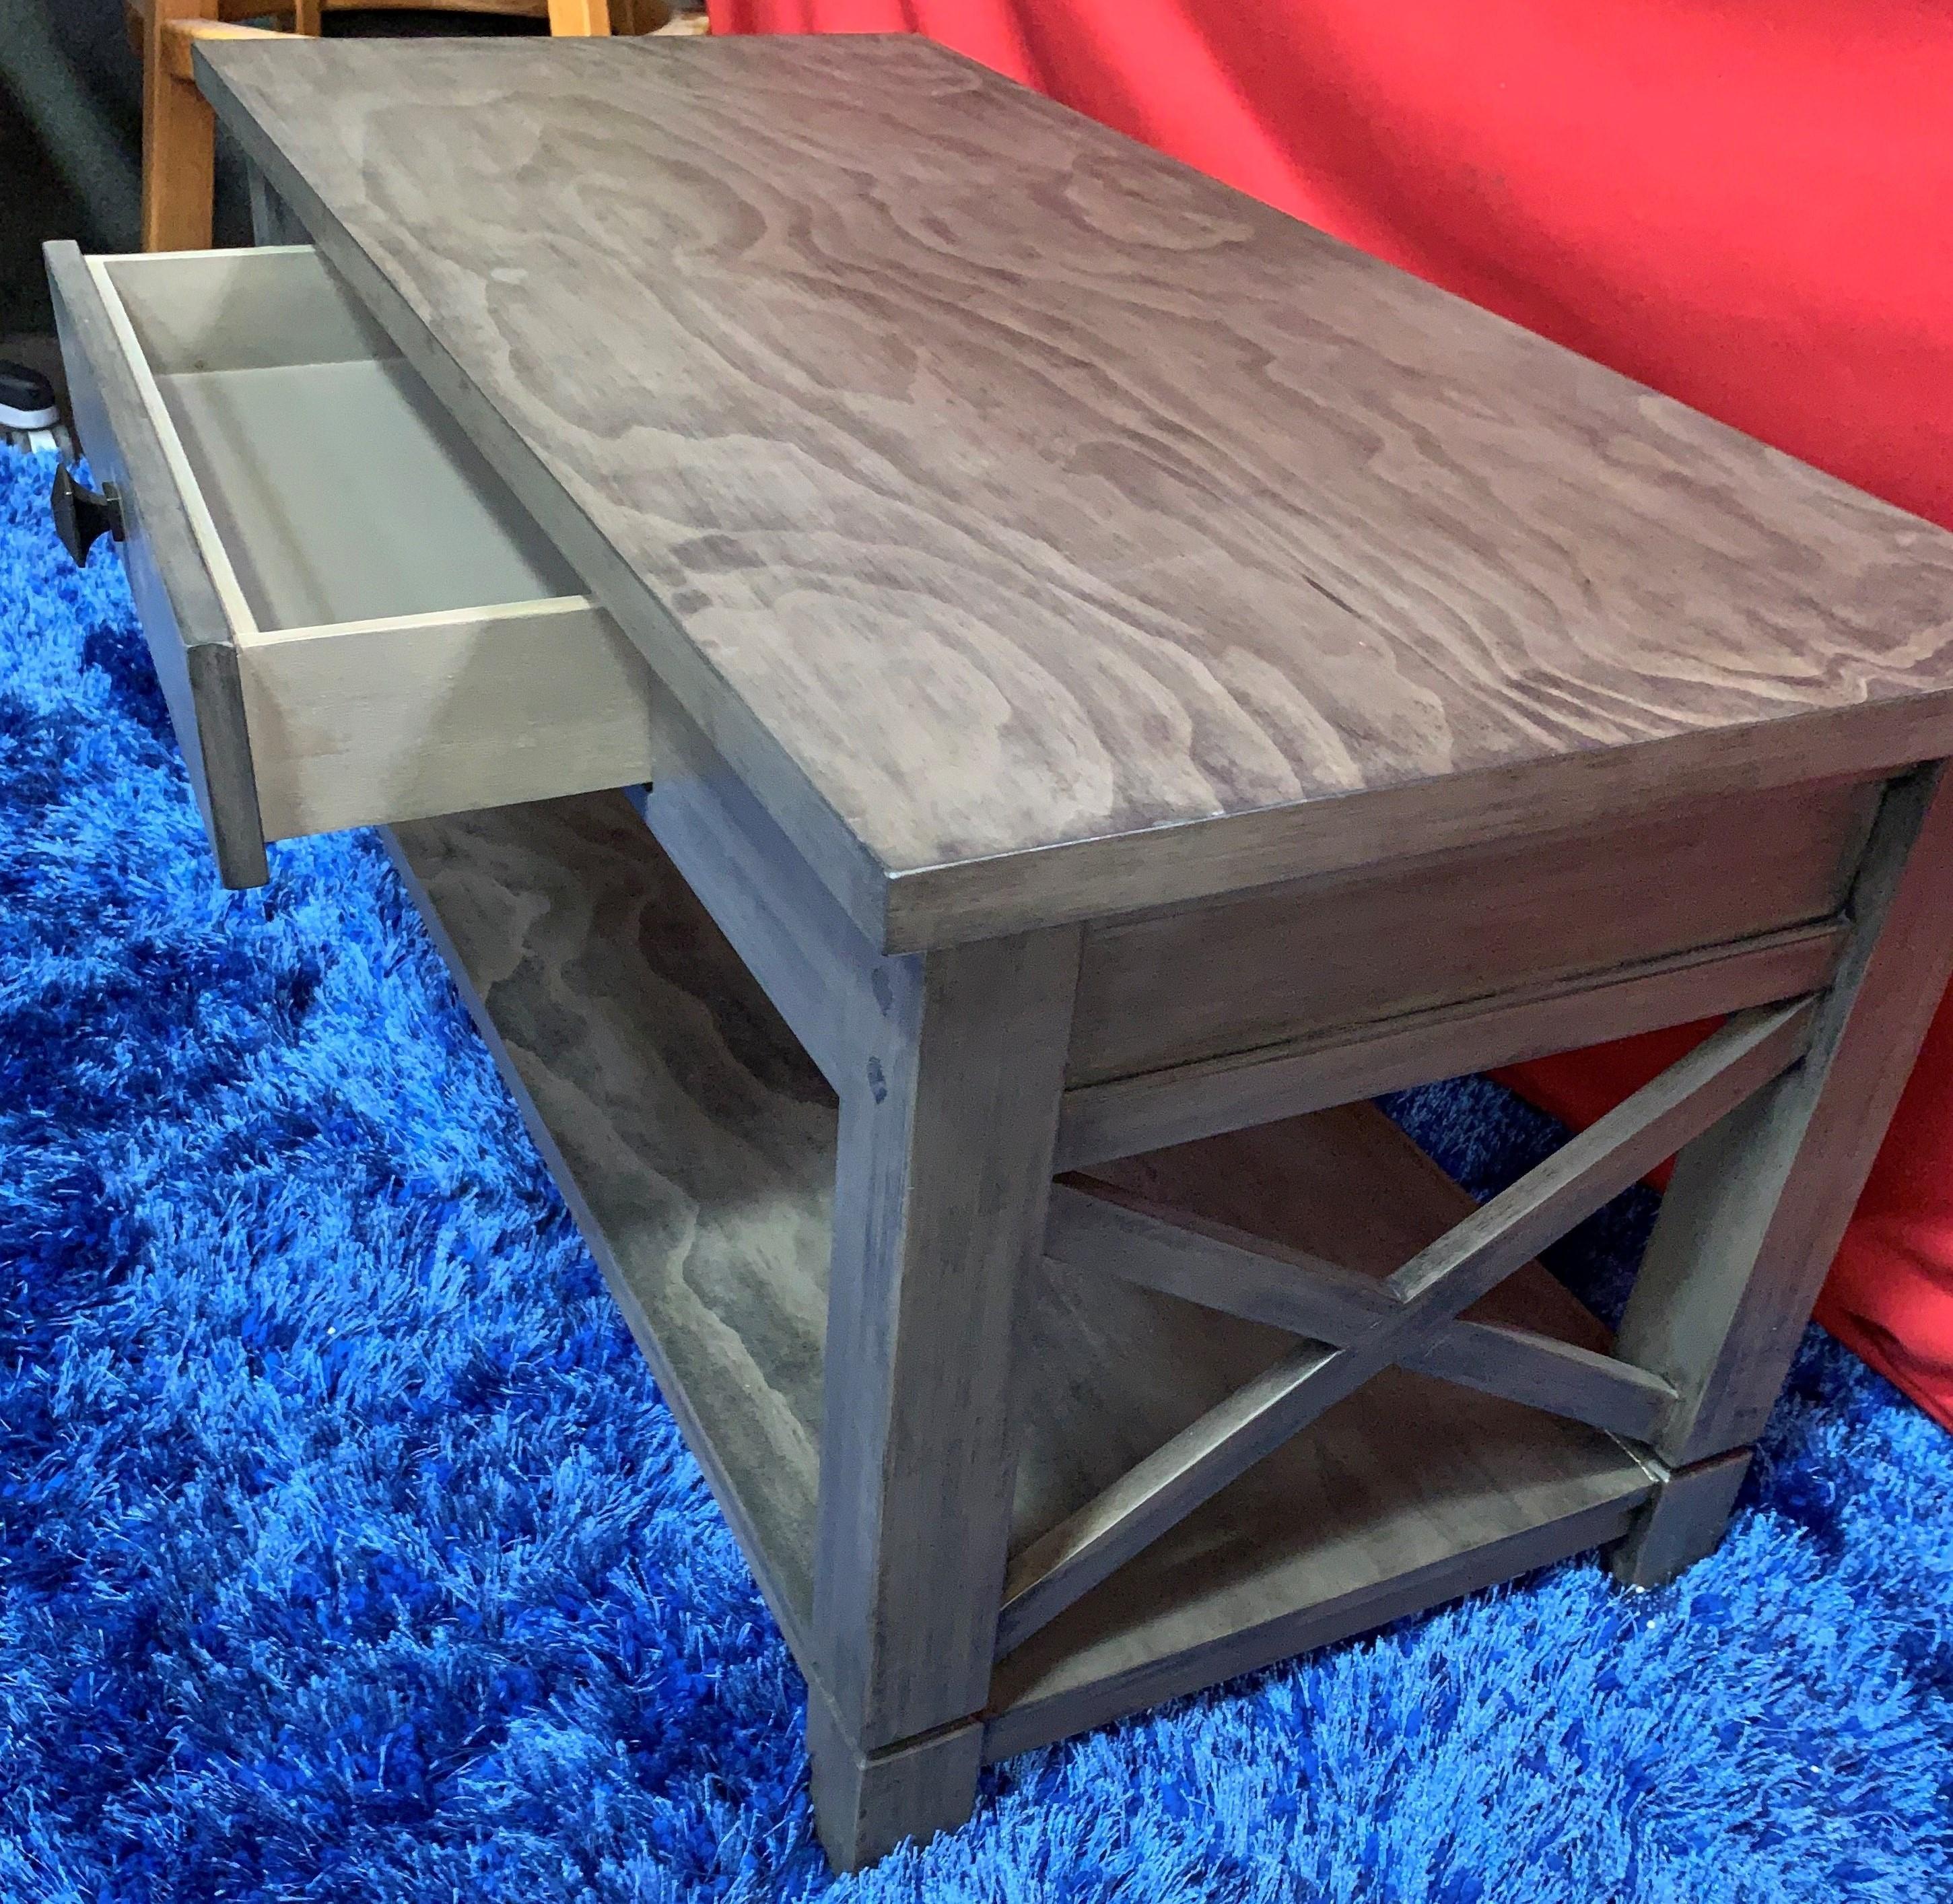 NEW DESIGNER FROM WMC - GREY COFFEE TABLE W/ DRAWER